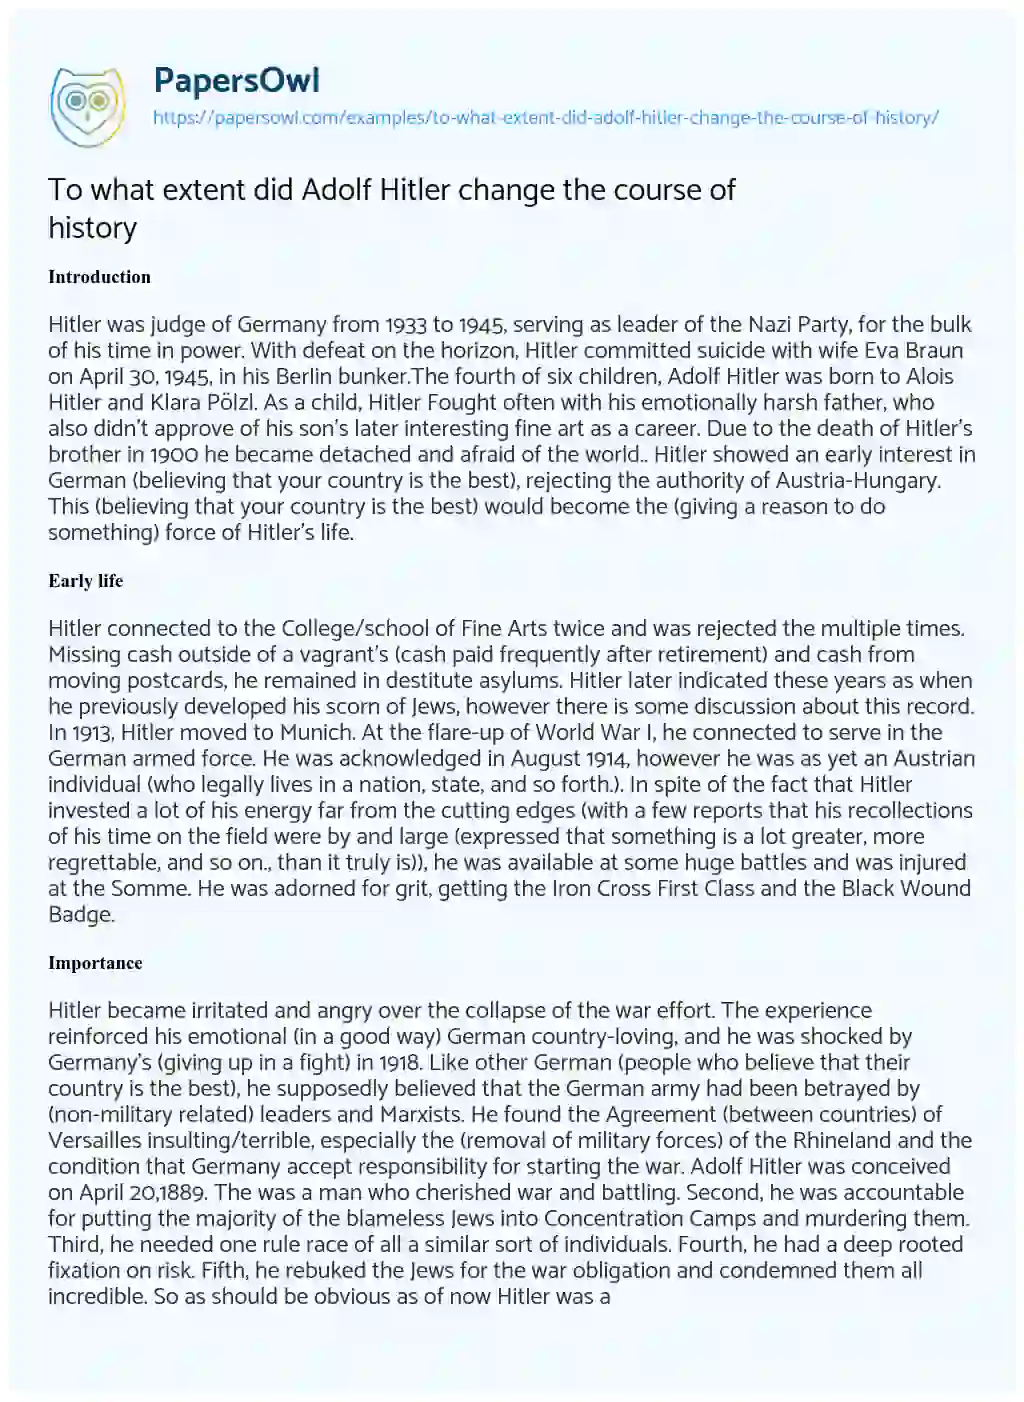 Essay on To what Extent did Adolf Hitler Change the Course of History